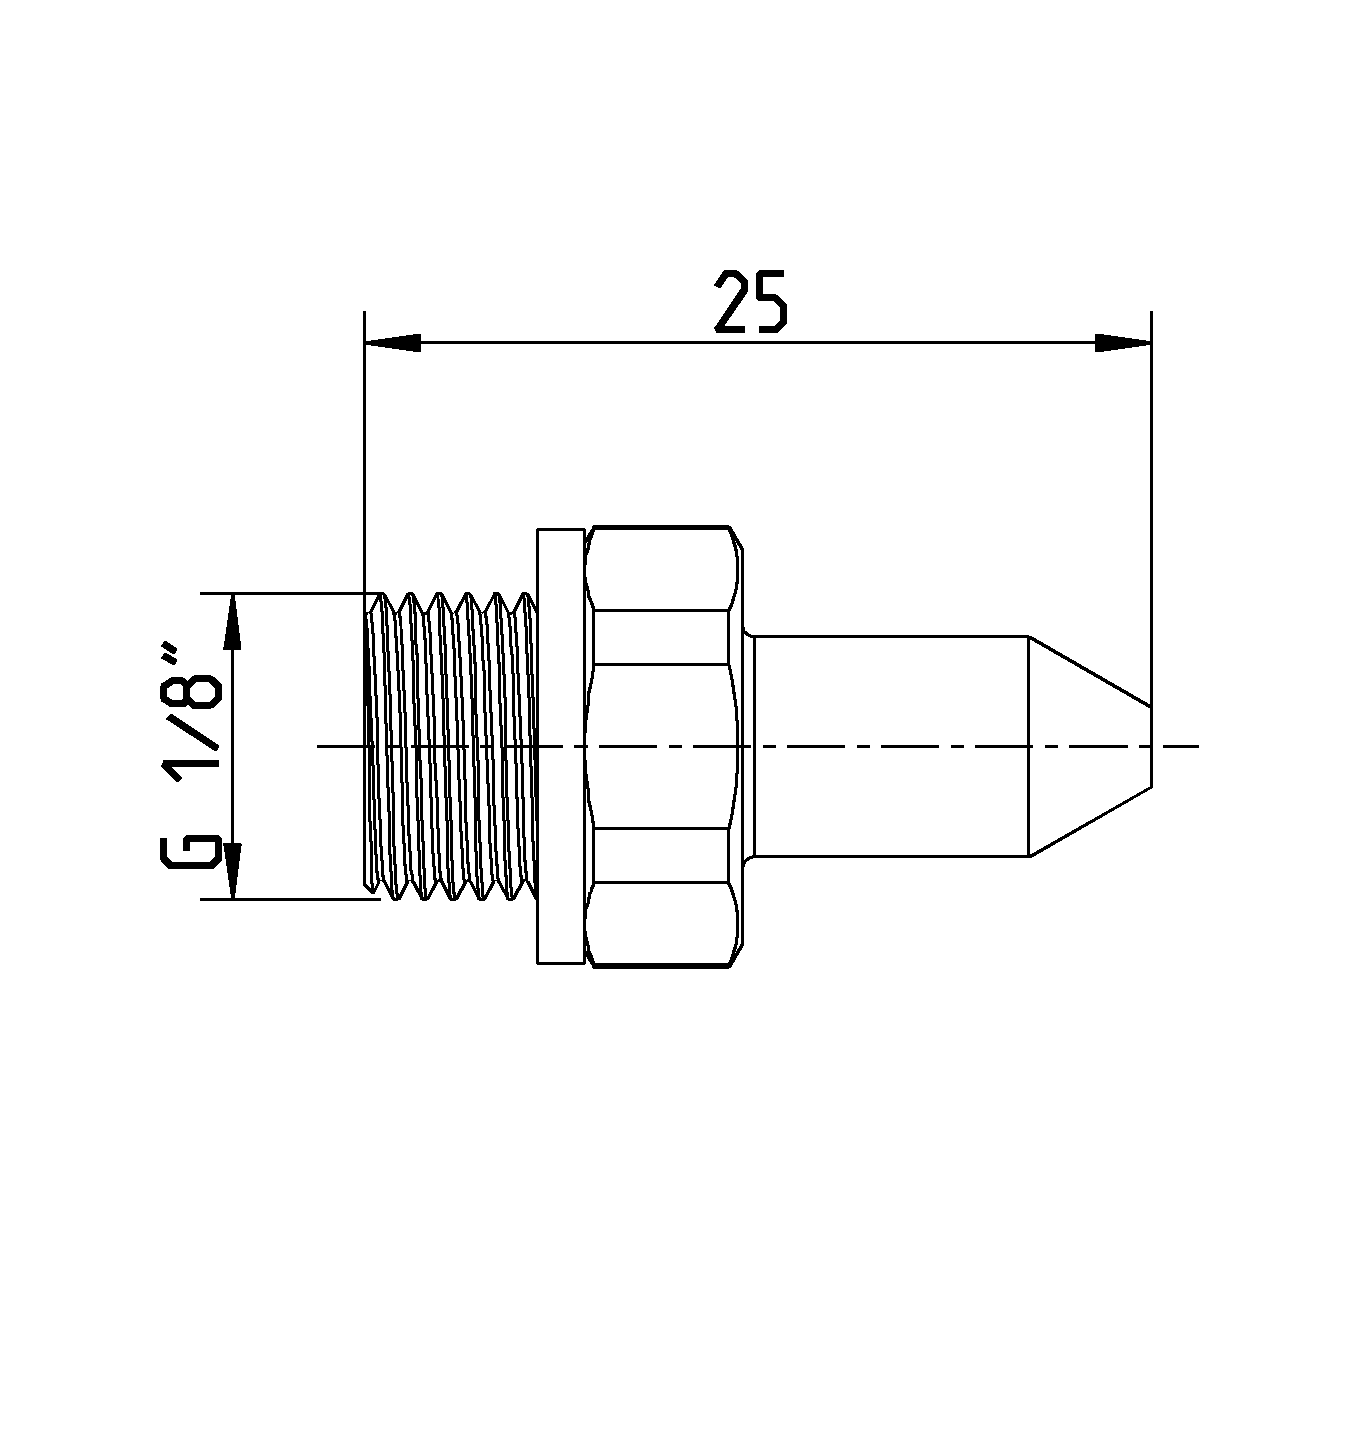 Dimesions of two-fluid jet-nozzle LMD 1/8"